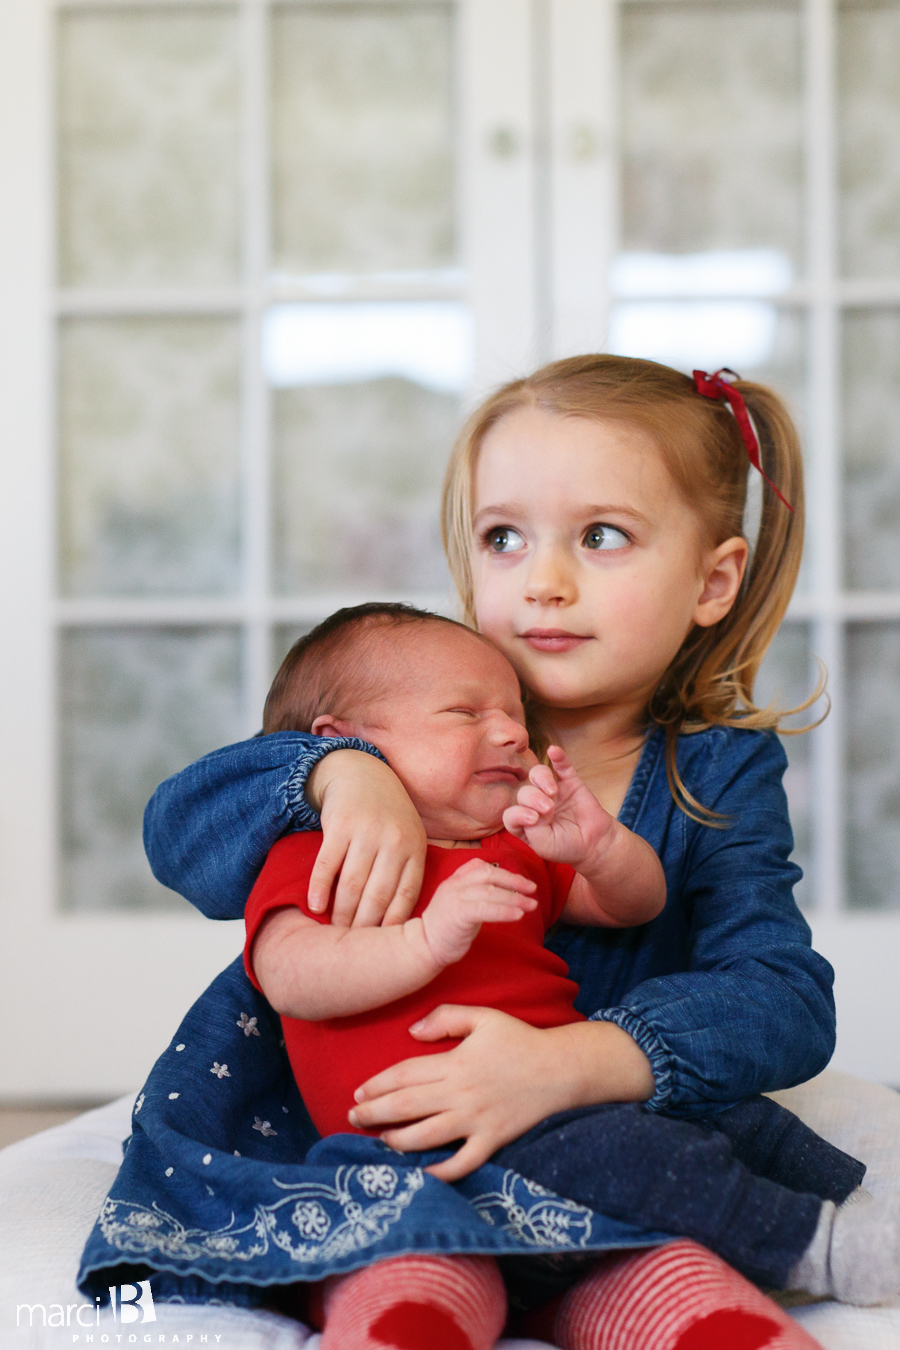 newborn photography - baby portraits - photos of newborn baby and siblings